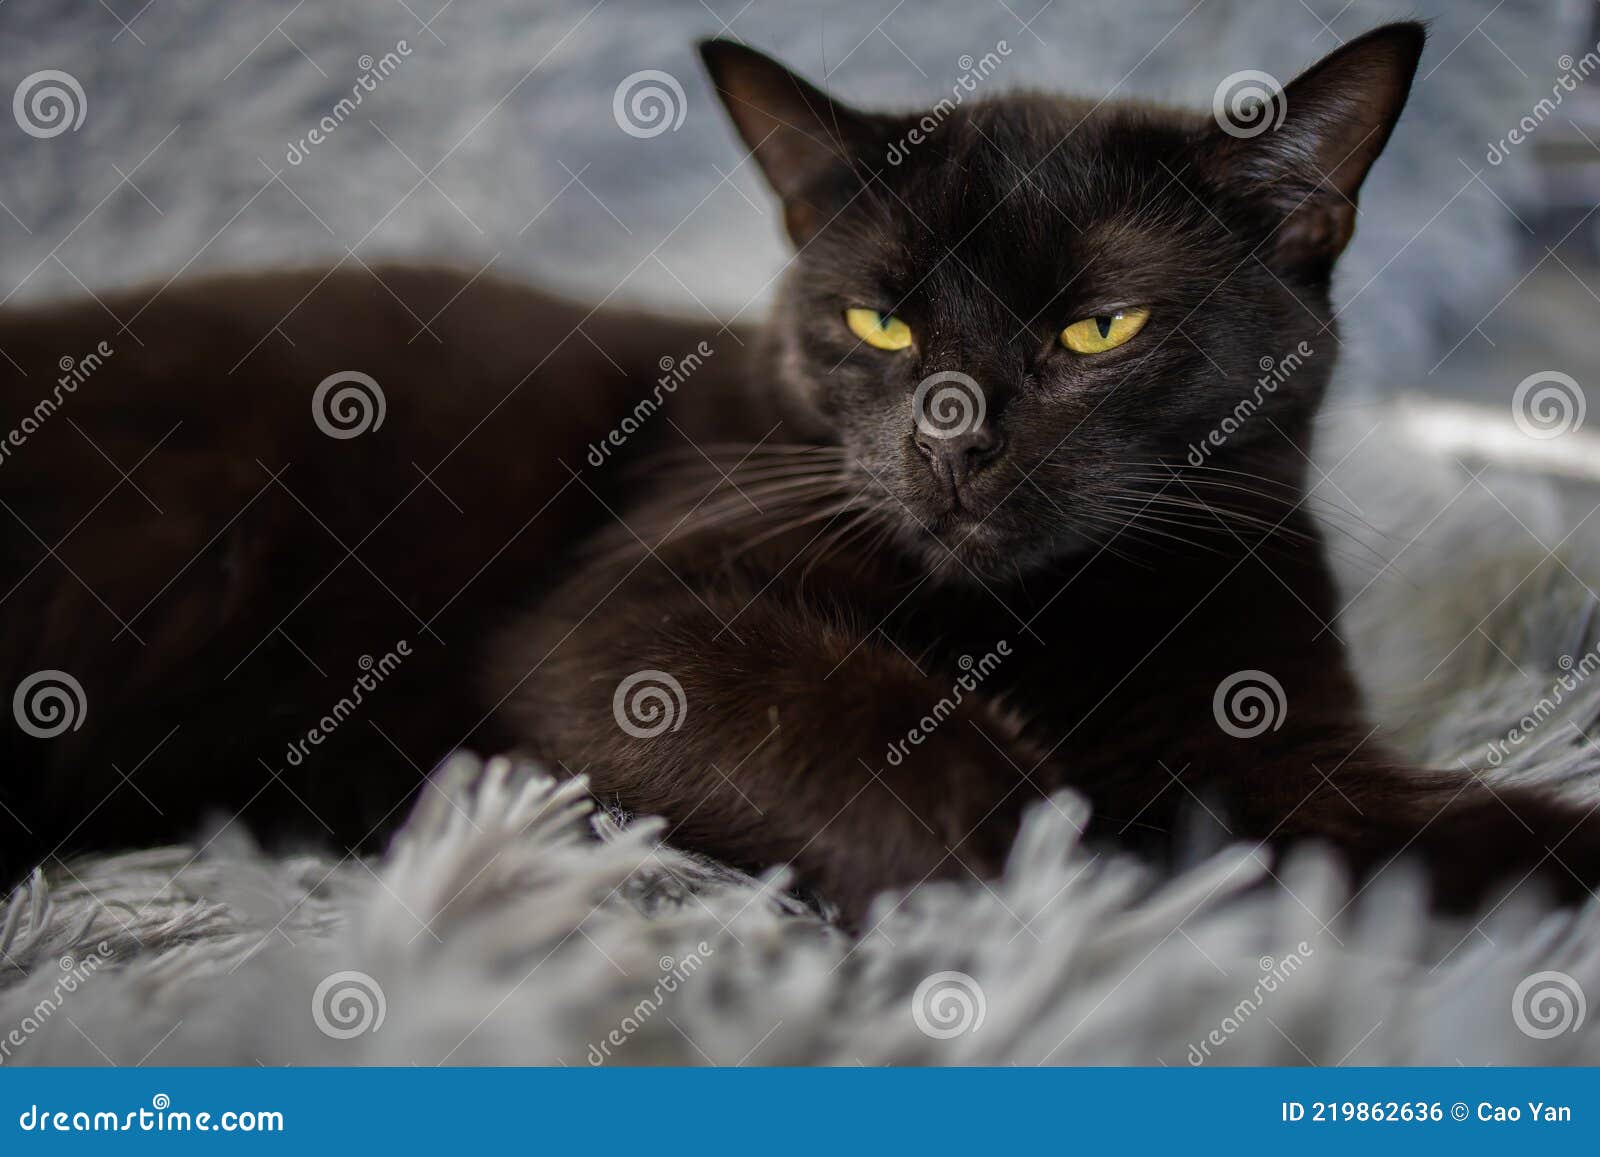 a picture of an angry black fuzzy cat with yellow